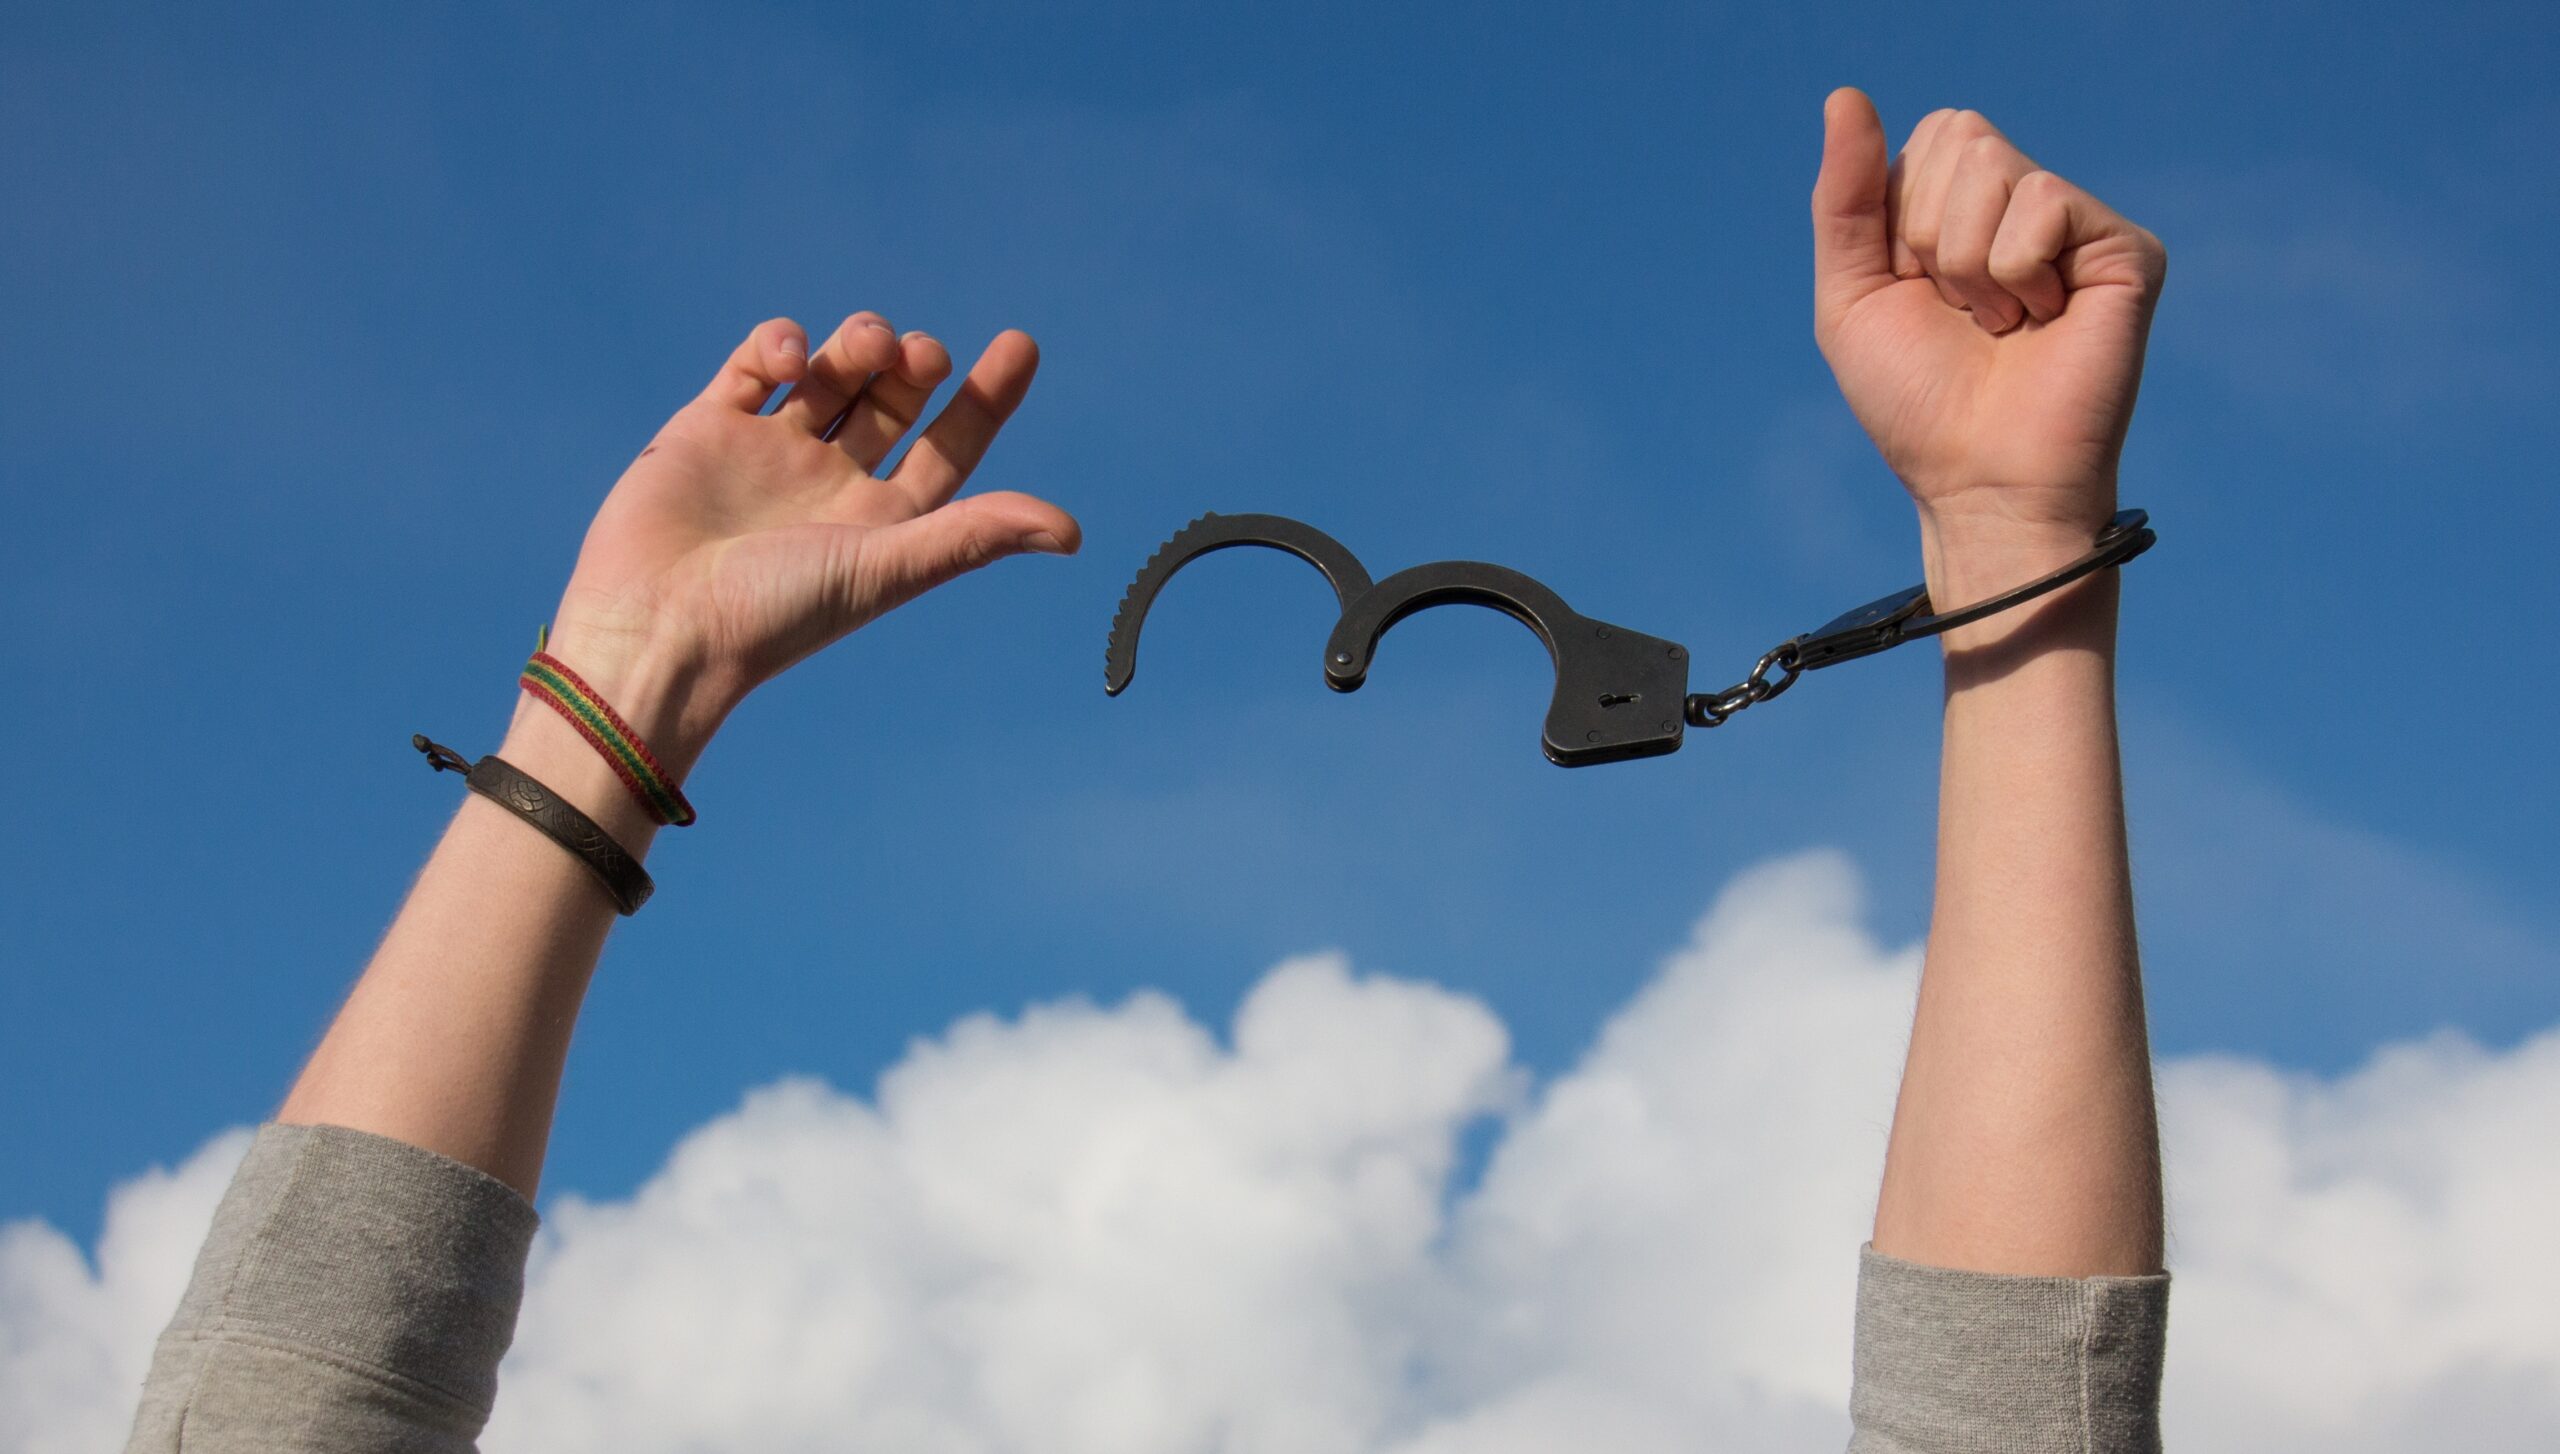 Breaking free from handcuffs